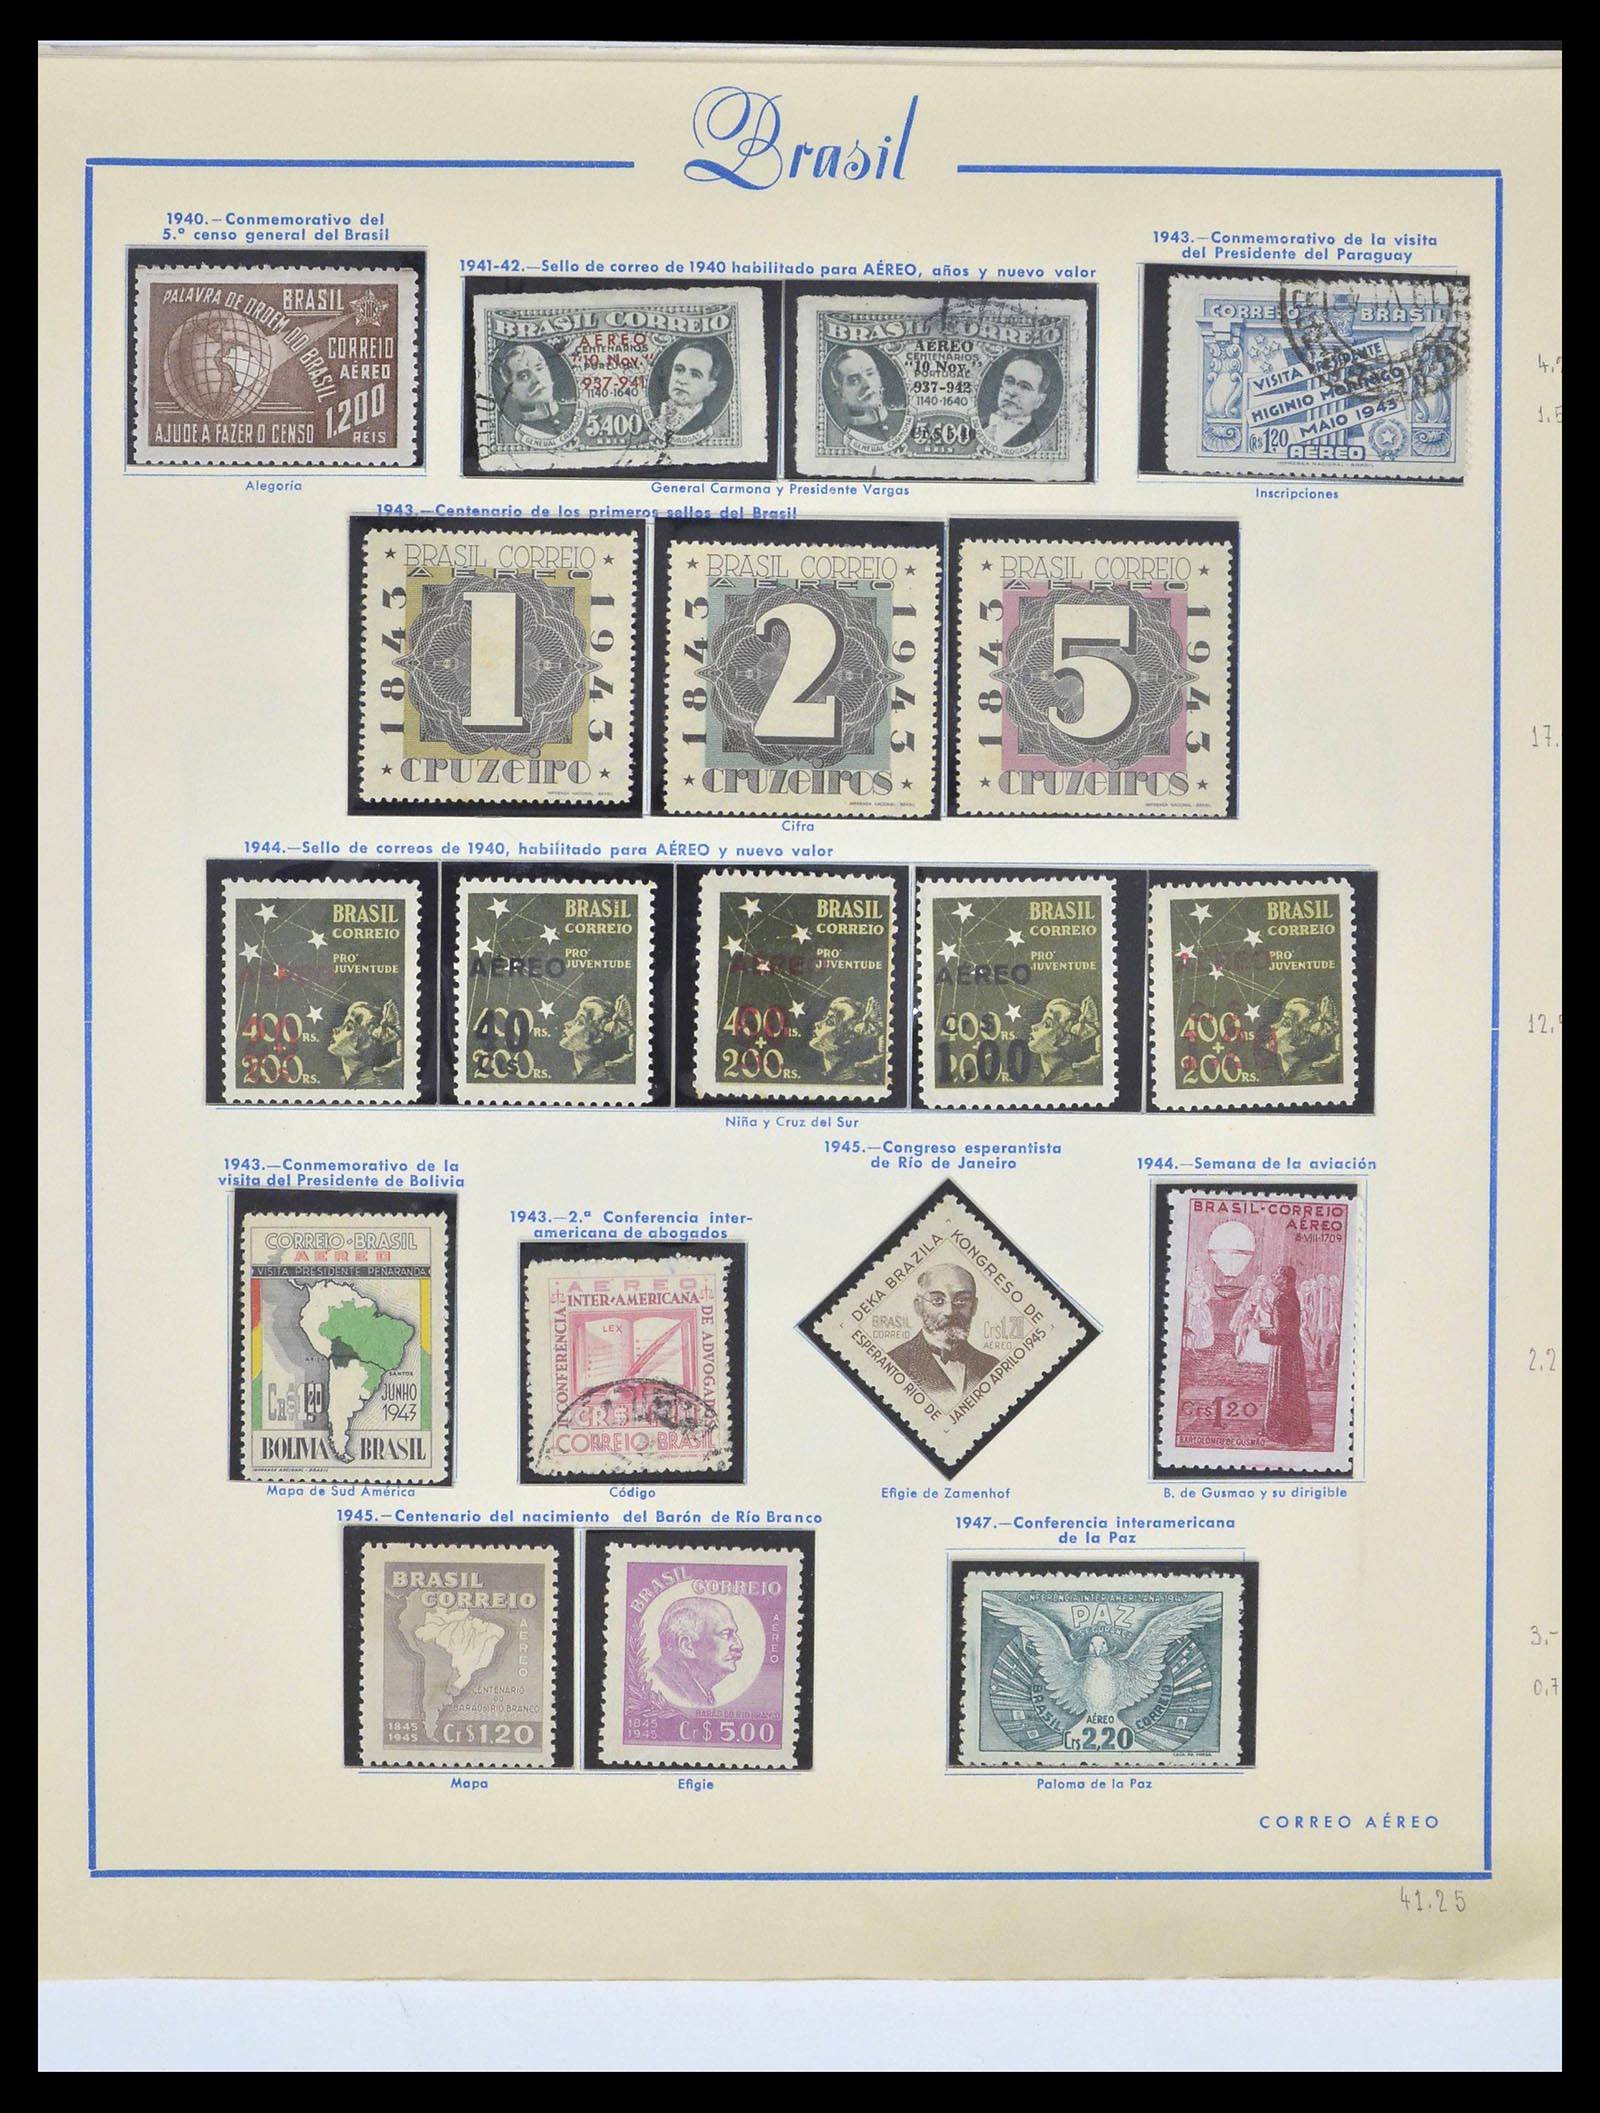 39245 0069 - Stamp collection 39245 Brazil 1843-1968.